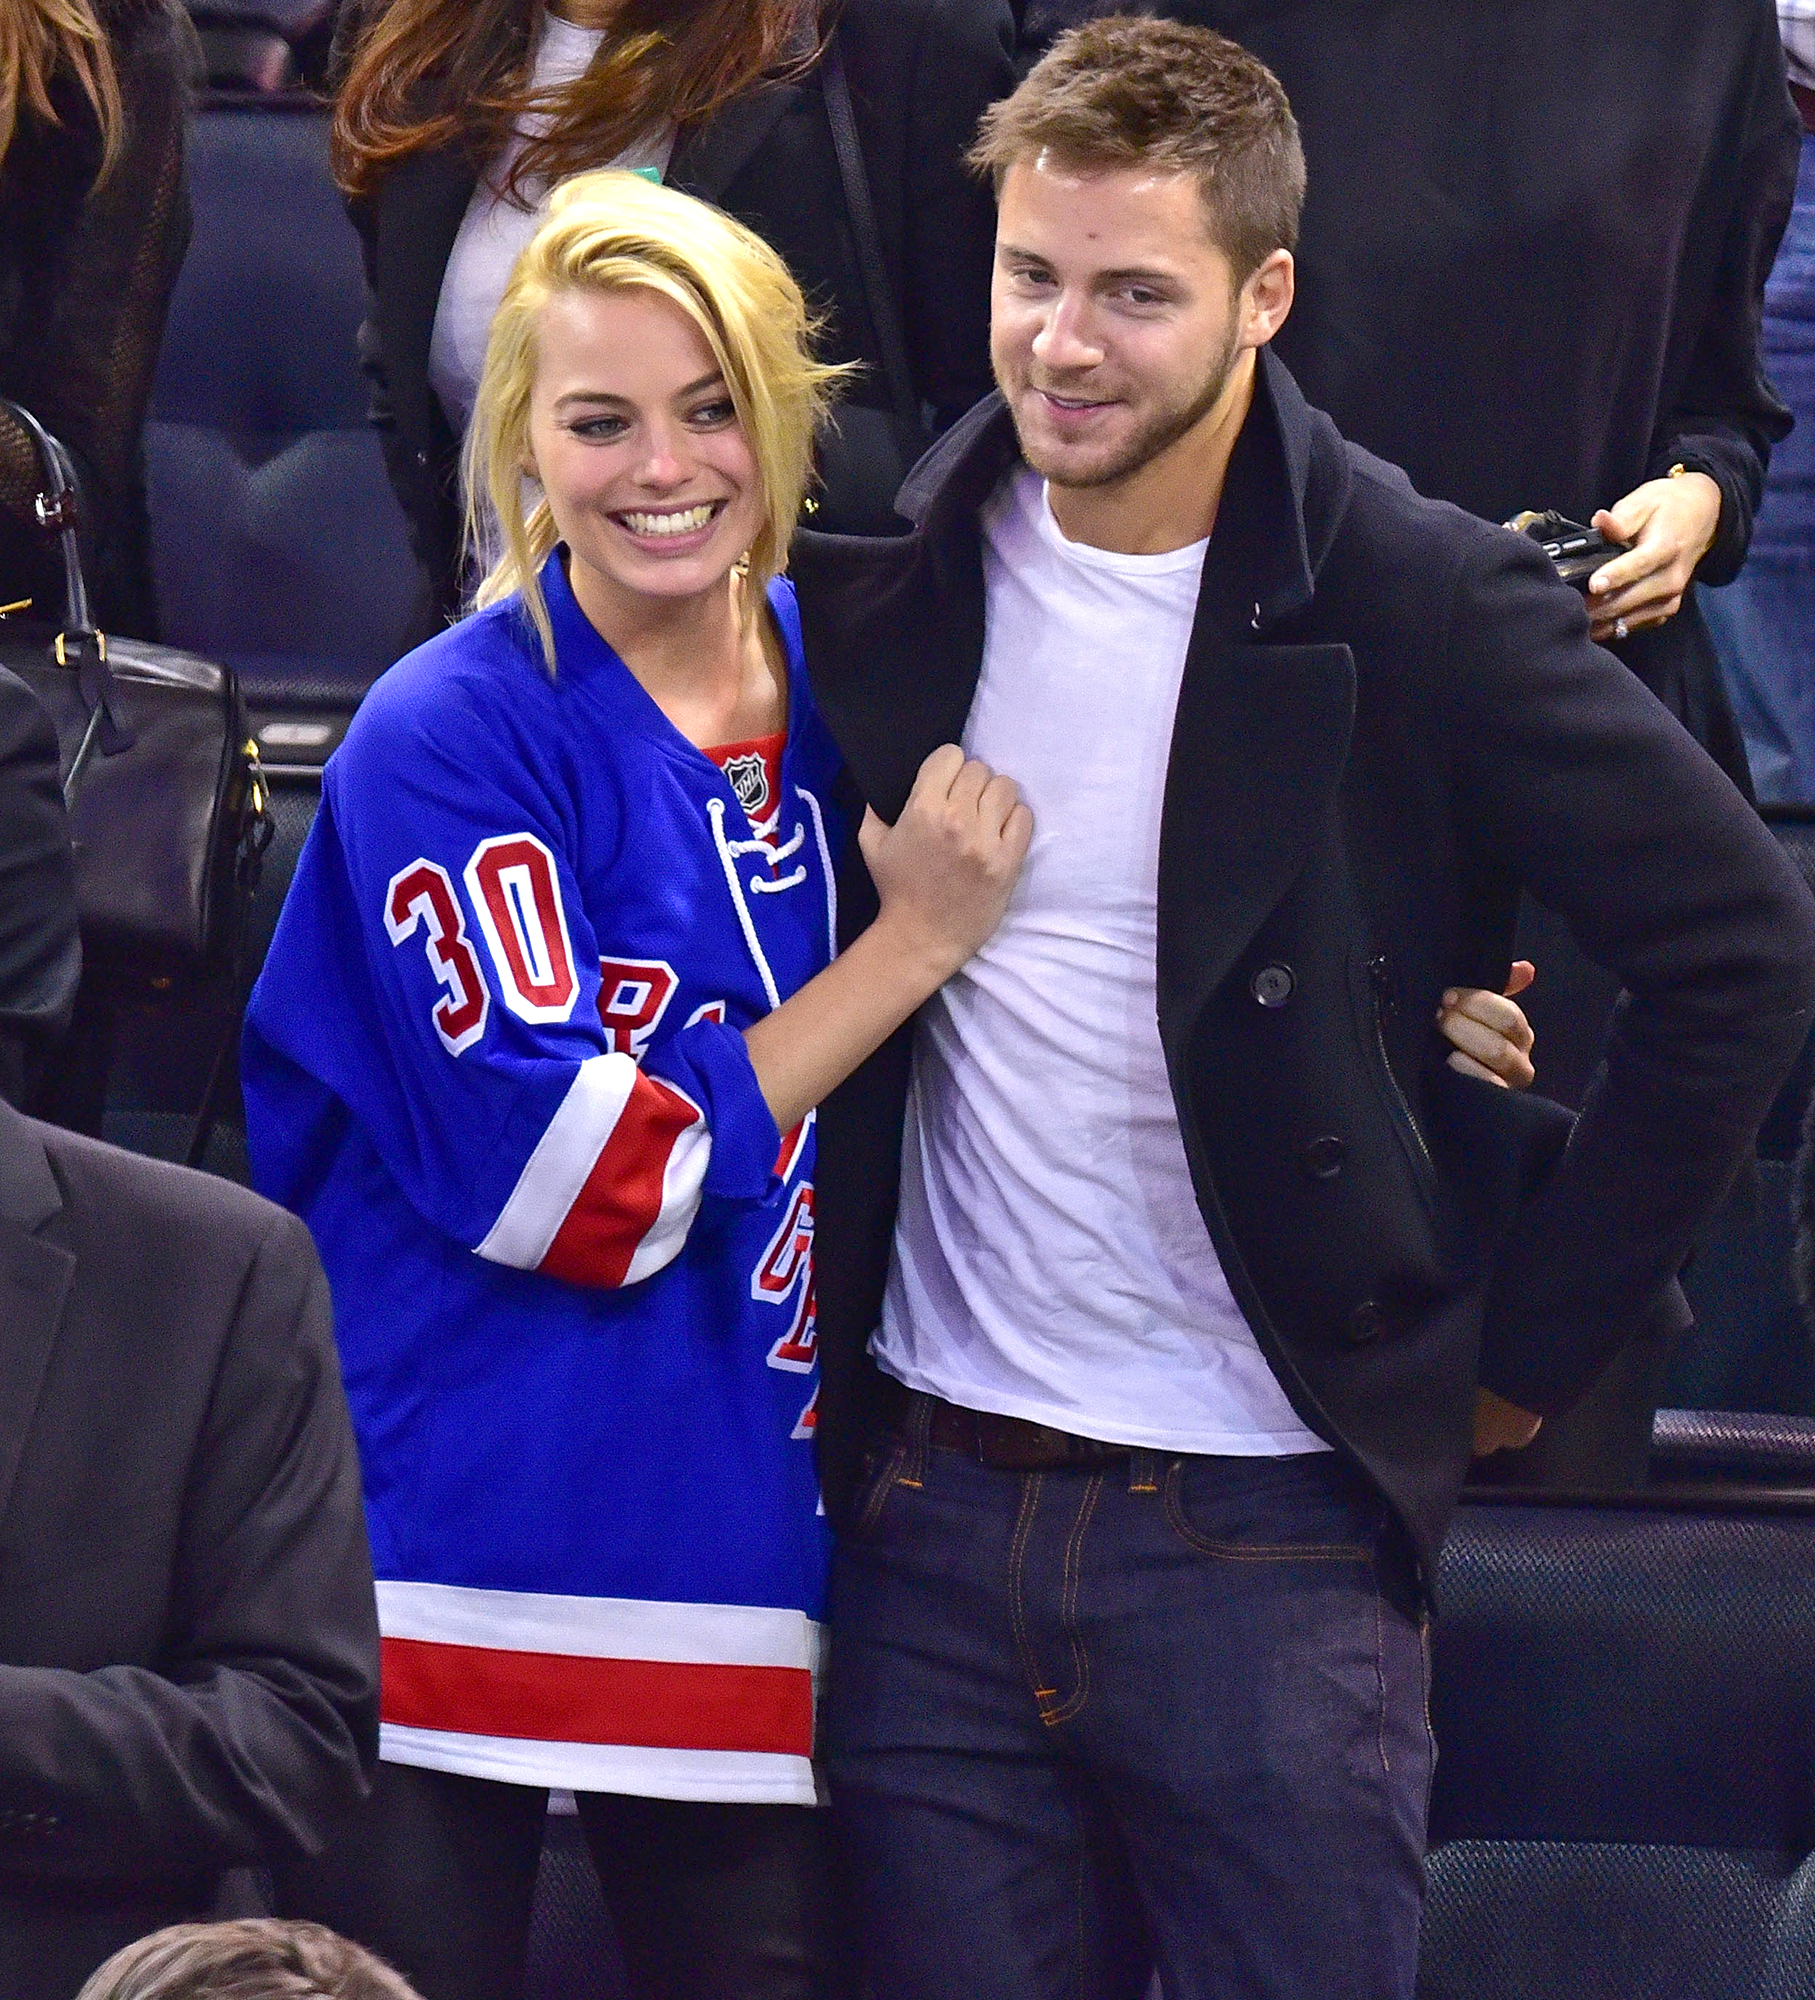 Margot Robbie Spotted Out With Boyfriend Tom Ackerley: Photo